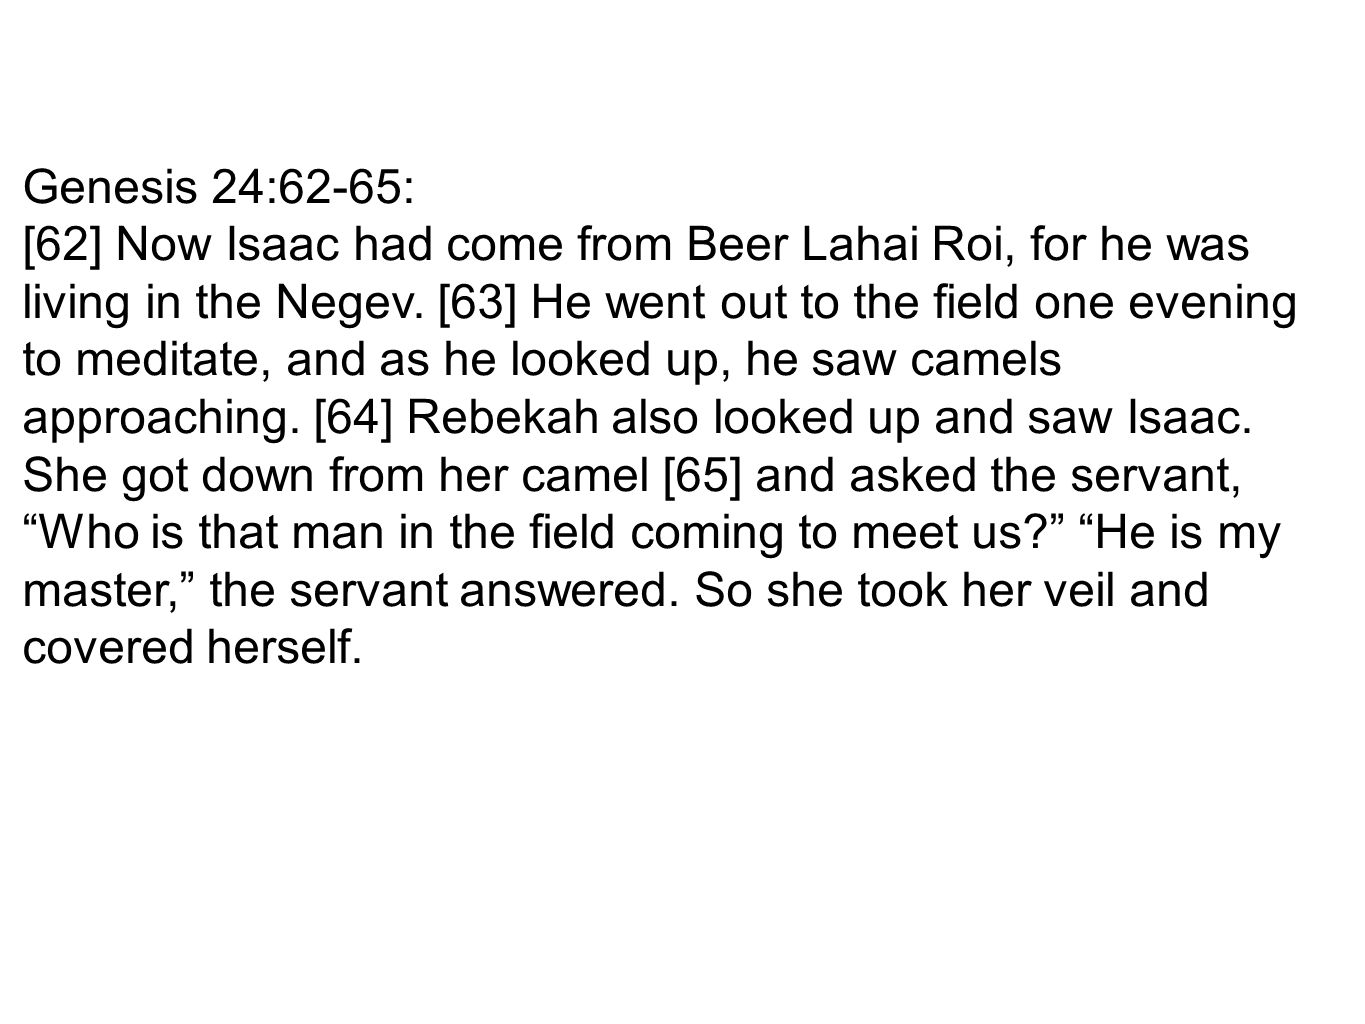 Genesis 24:62-65: [62] Now Isaac had come from Beer Lahai Roi, for he was living in the Negev.